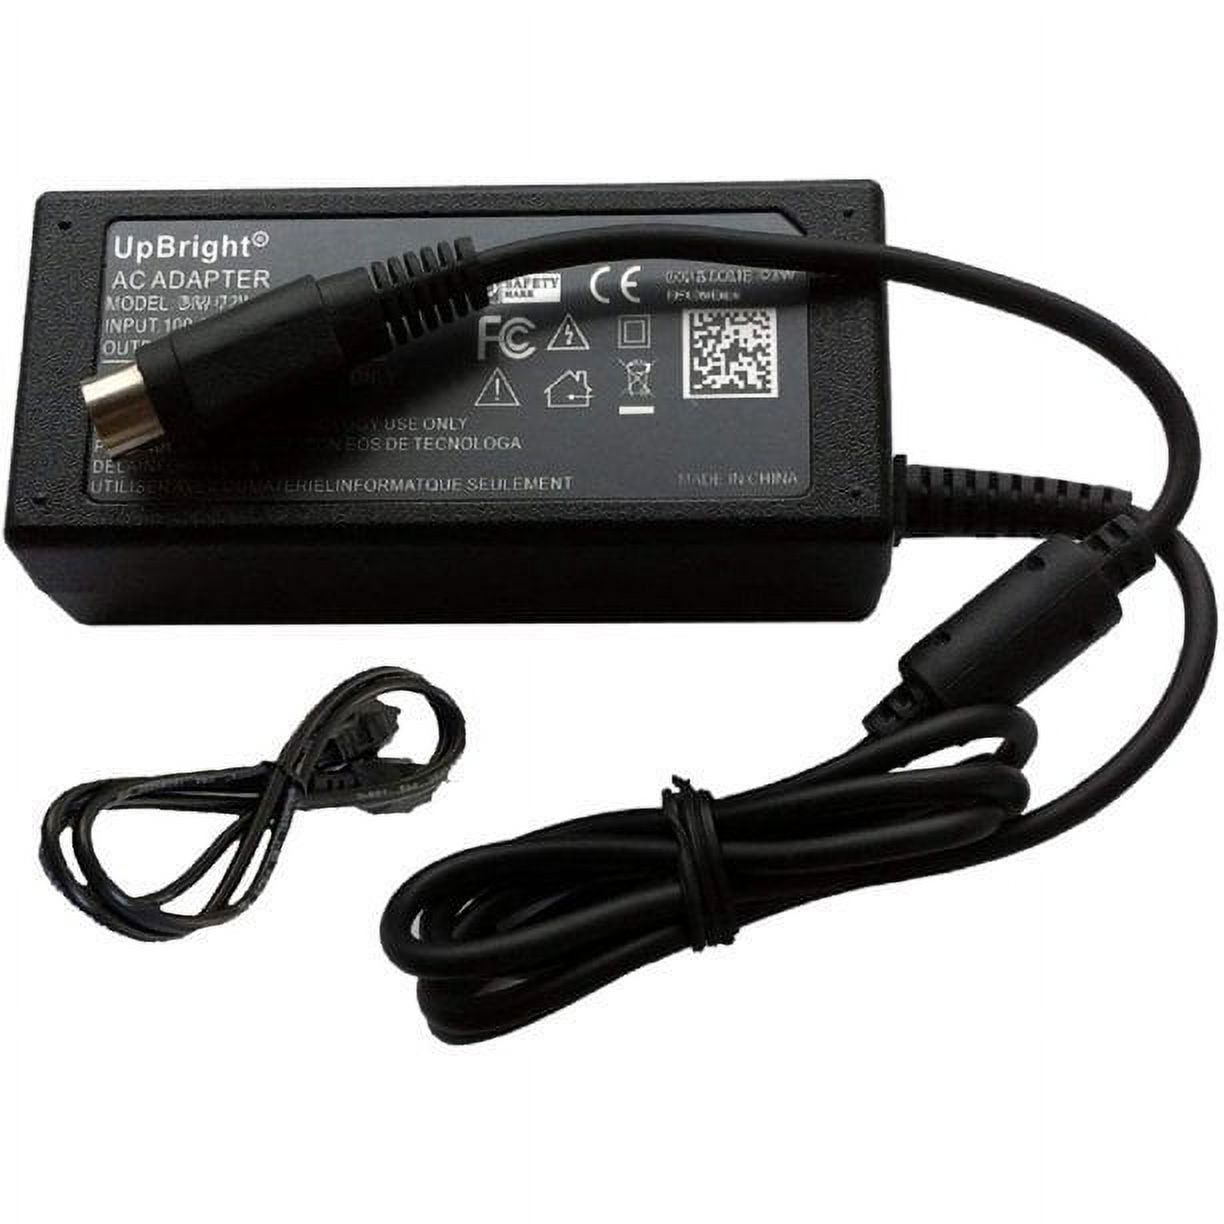 UpBright 3-Pin 12V AC/DC Adapter Compatible with Skyworth SLC-1921A SLC-1921A-3S SLC-1519A-3M SLC-1519A-3S SLC-1369A-3C SLC-1369A-3S SLC-1369A-3 SLC1369A3 SLC-1569A SLC-1569A-3 LED HD TV 533Z0905063PI - image 2 of 5